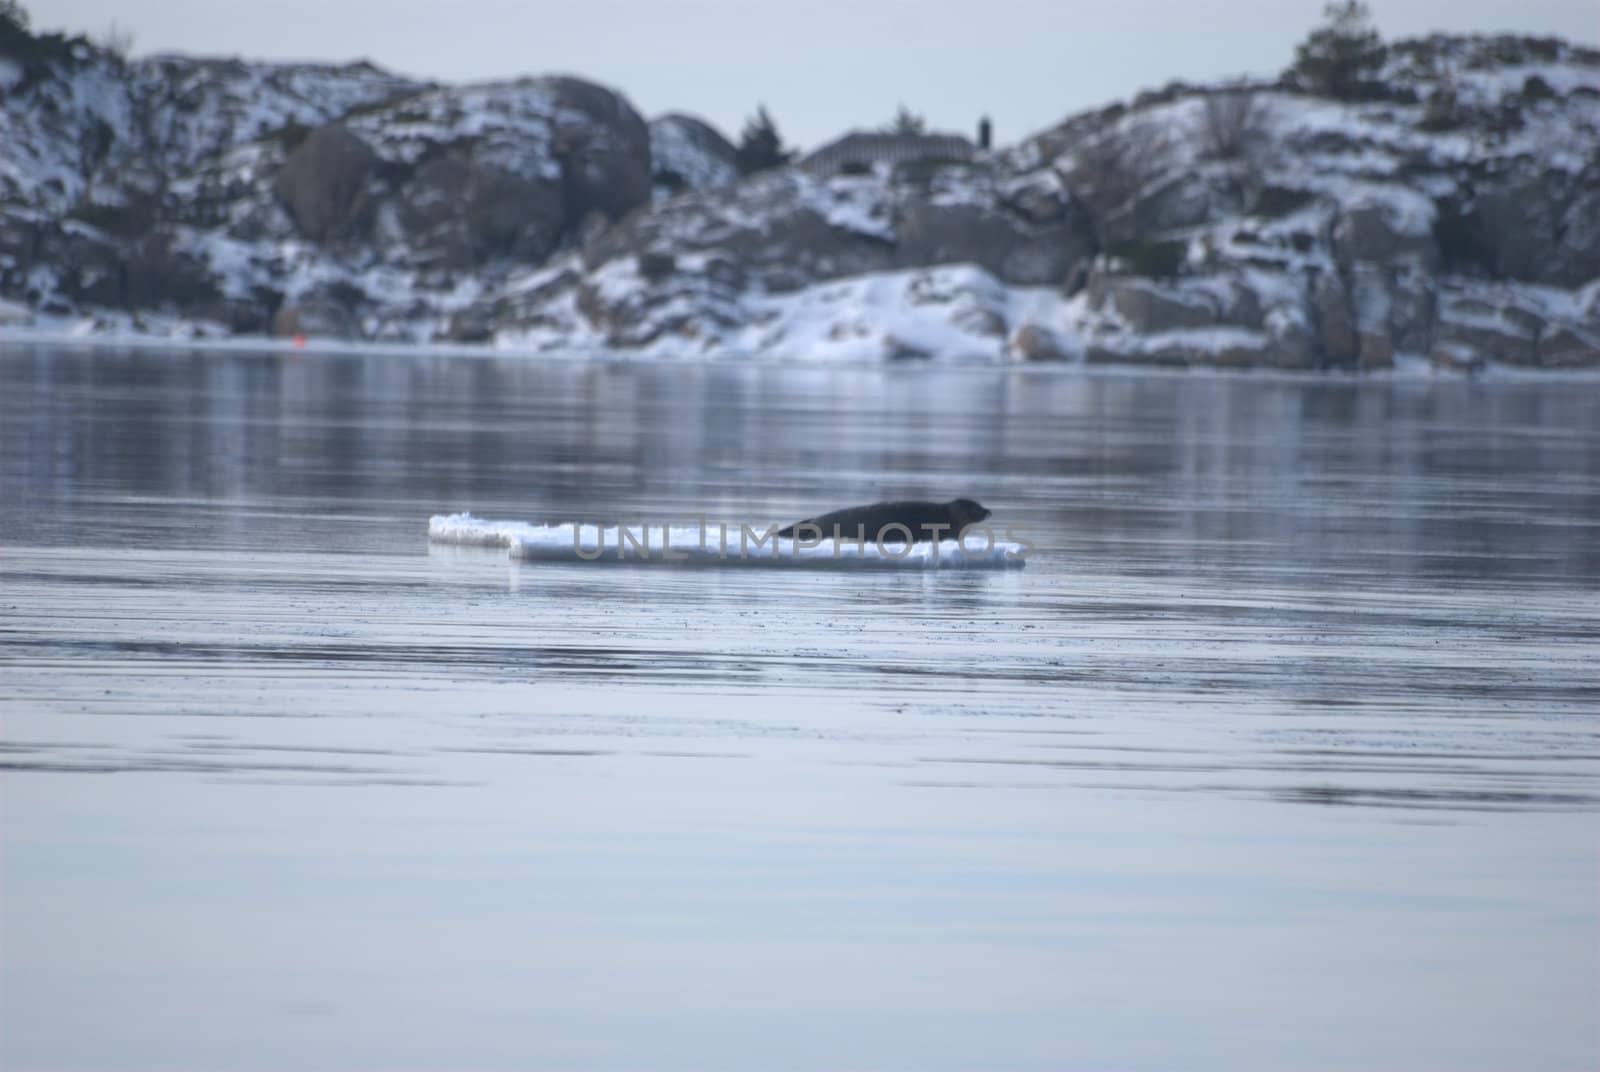 seals on ice floes by rubeh2